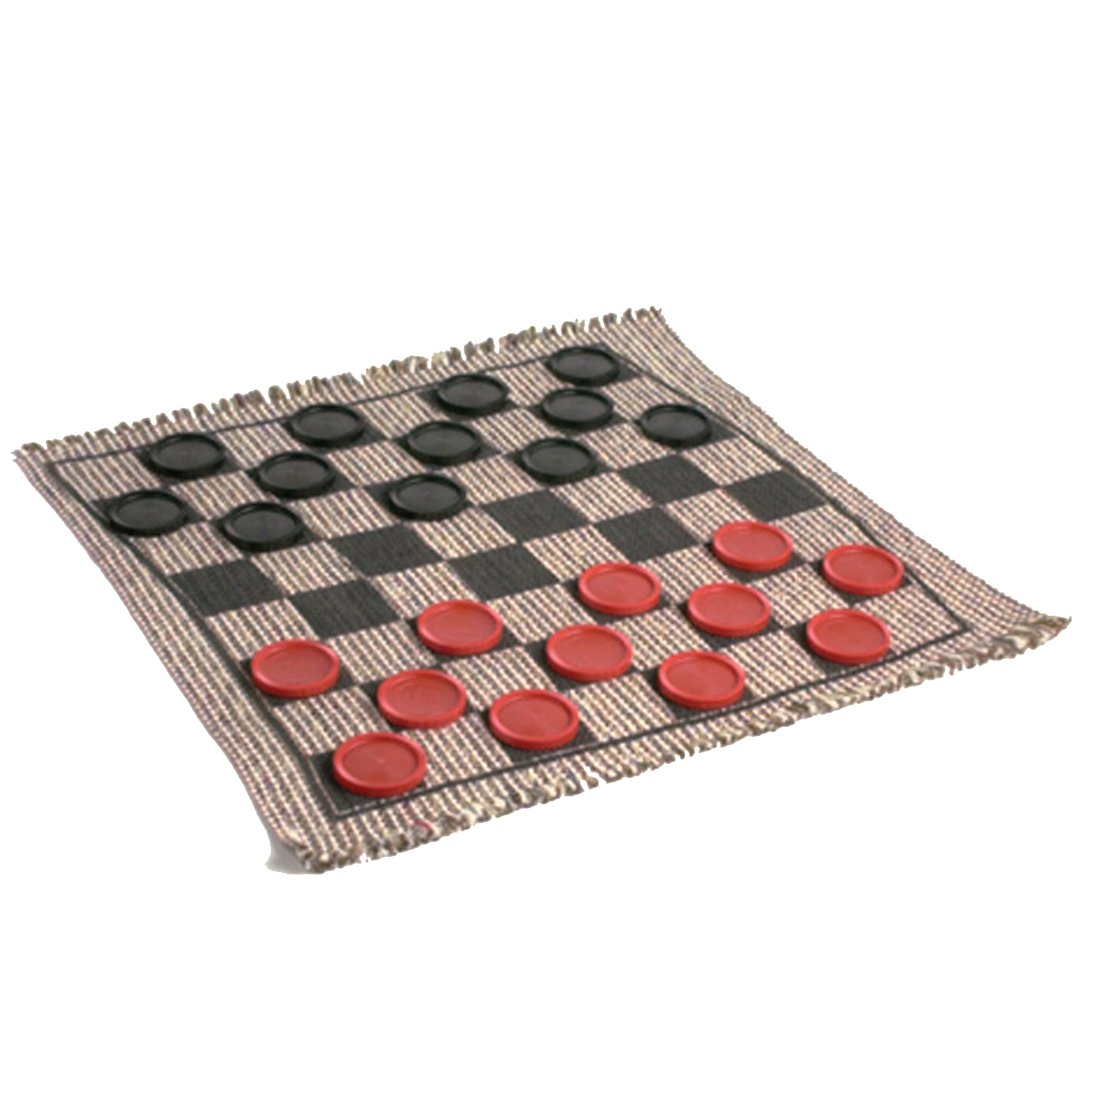 & Events & Family Fun Kids BBQ Giant 3-in-1 Checkers and Mega Tic Tac Toe with Reversible Rug Travel Great for Game Night Parties Indoor/Outdoor Jumbo Classic Board Games for Friends 